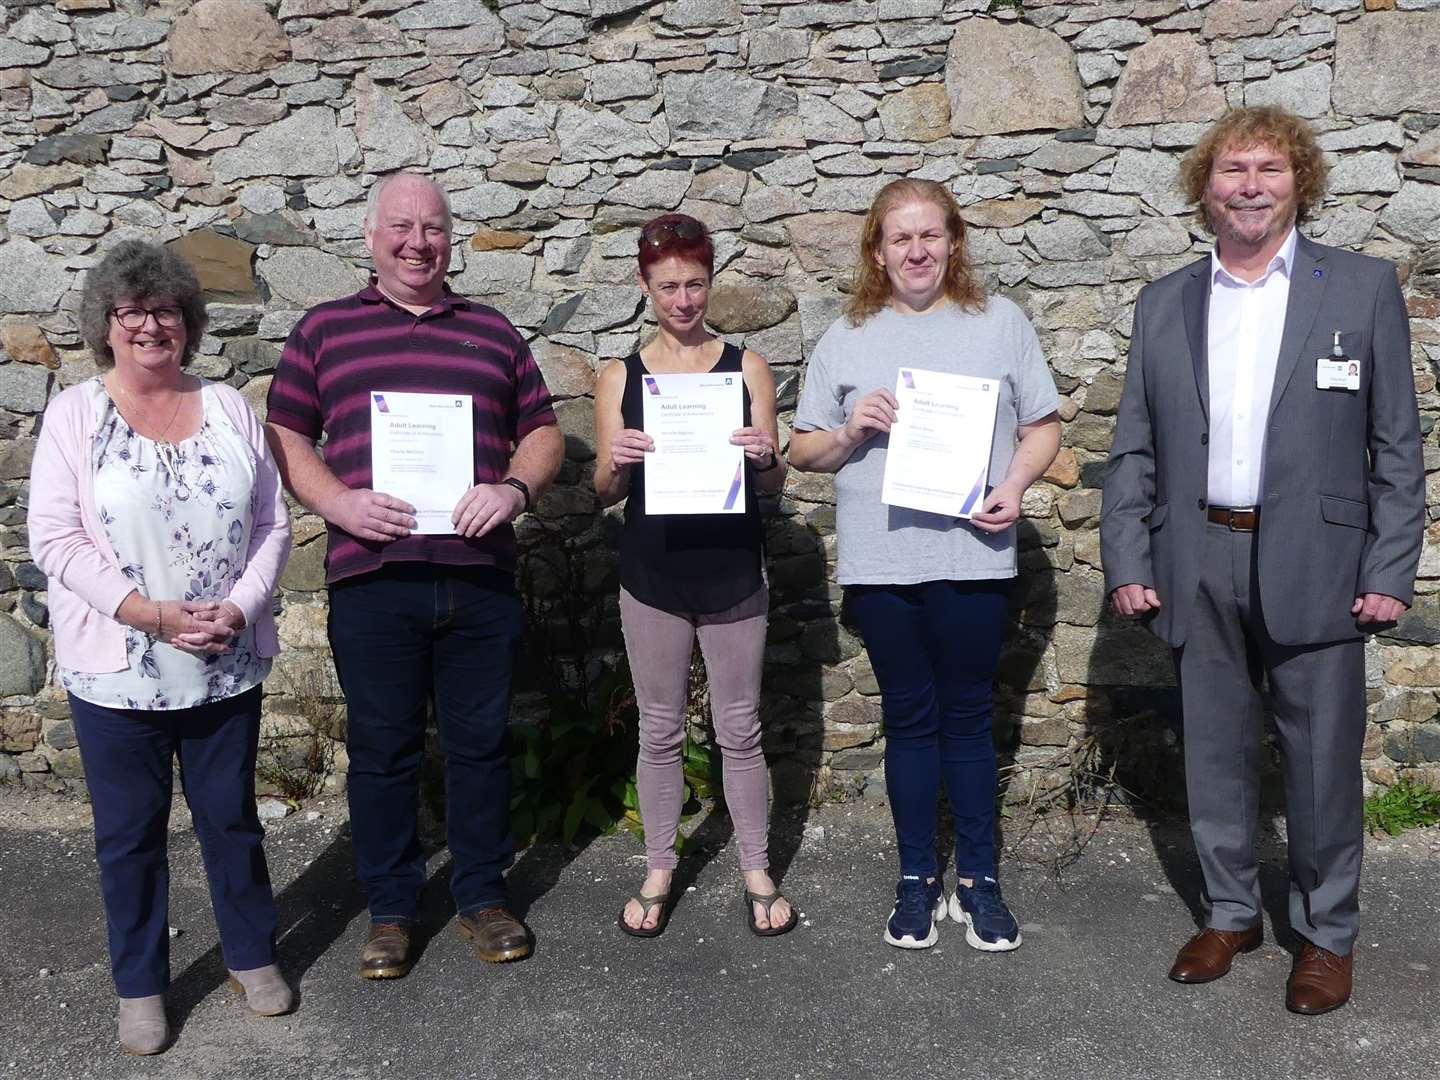 At the presentation of Adult Learner Certificates (from left) councillor Gillian Owen, Charles McCorry, Michelle Baguley, Wilma Wilson and Philip Boath.